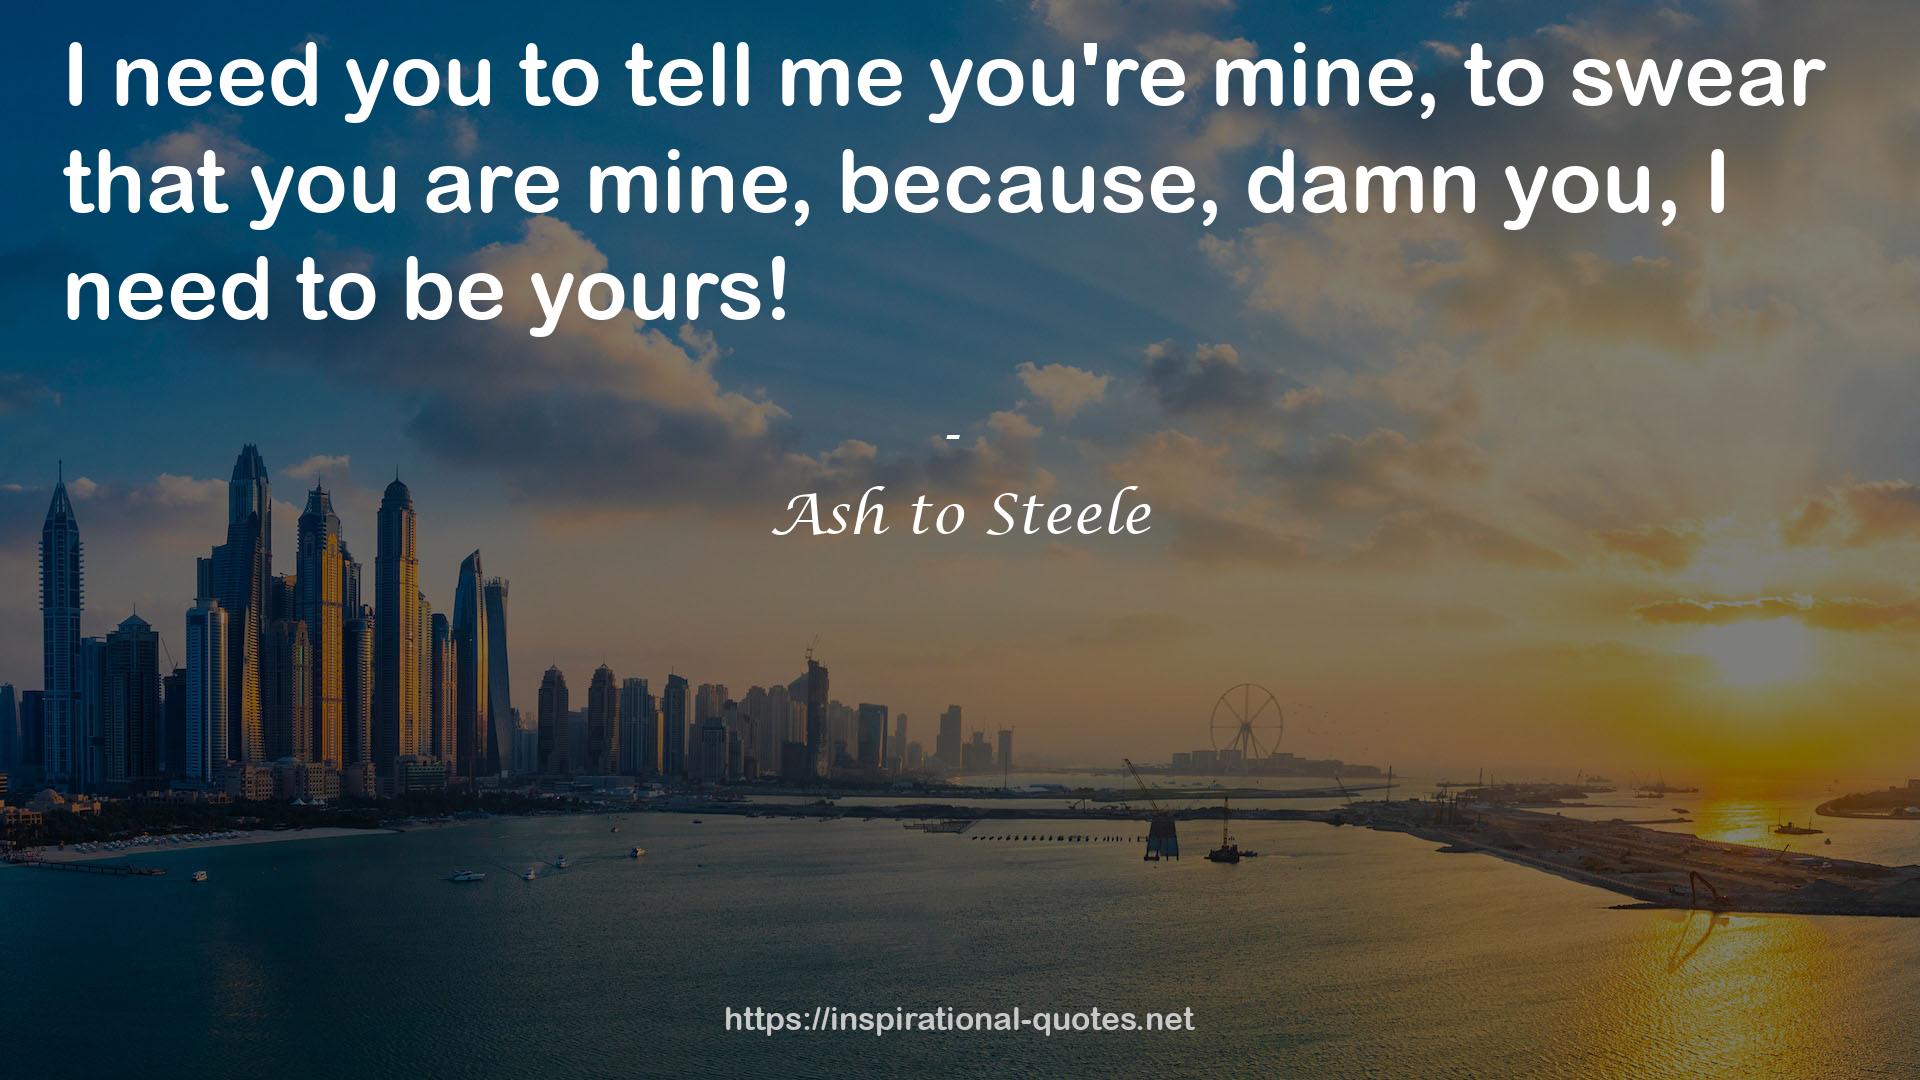 Ash to Steele QUOTES